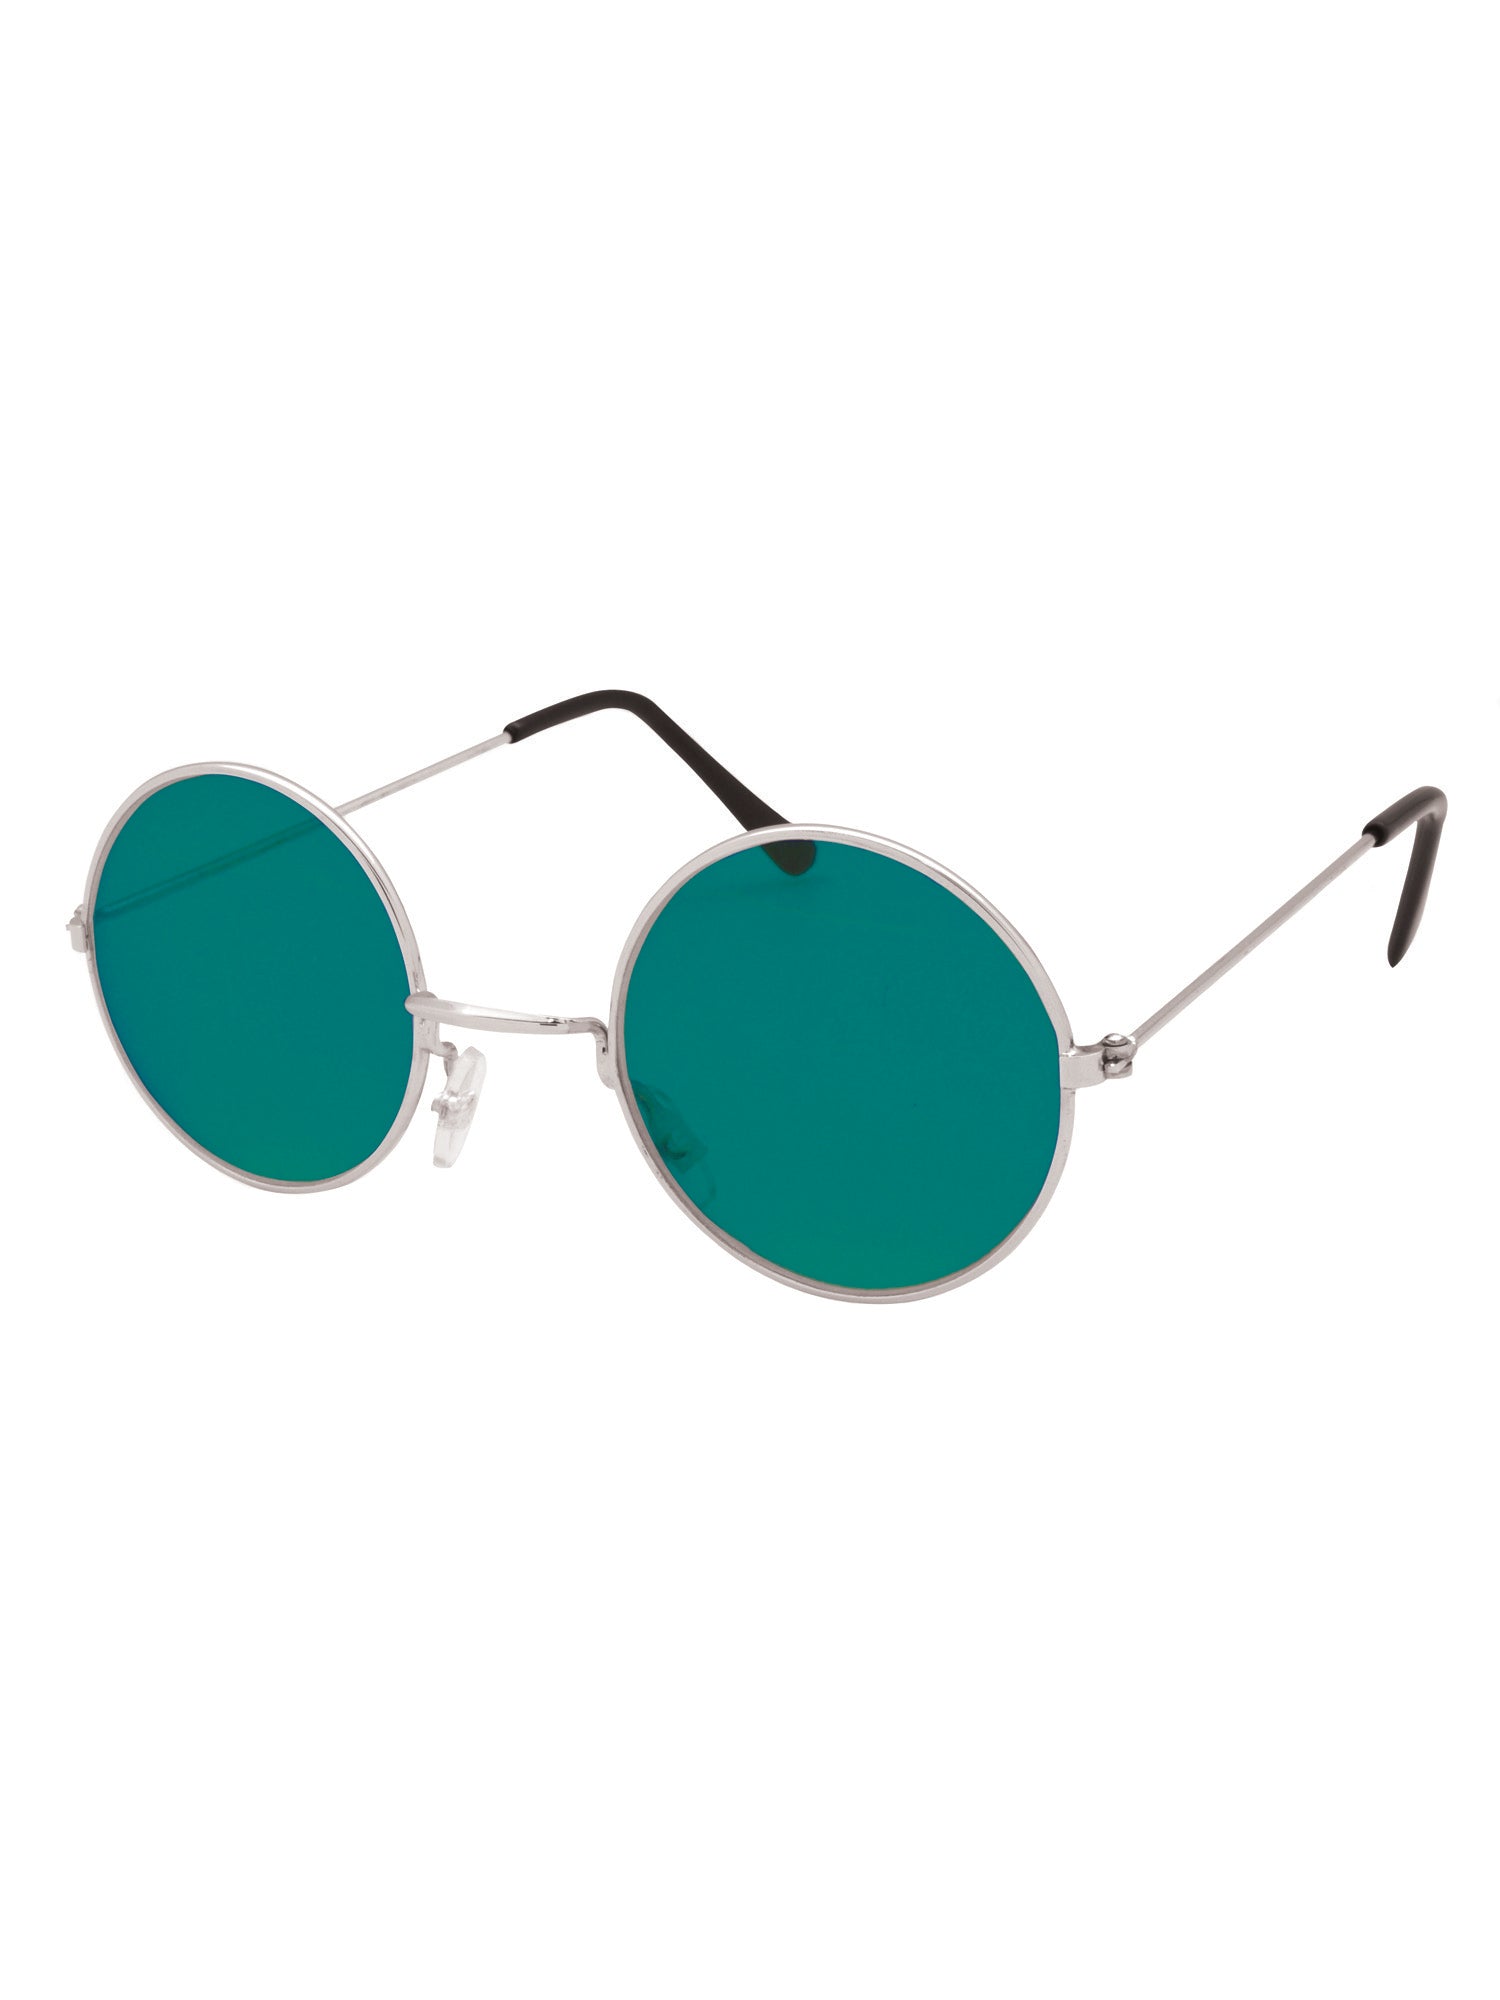 Glasses, Green, Generic, Accessories, One Size, Front